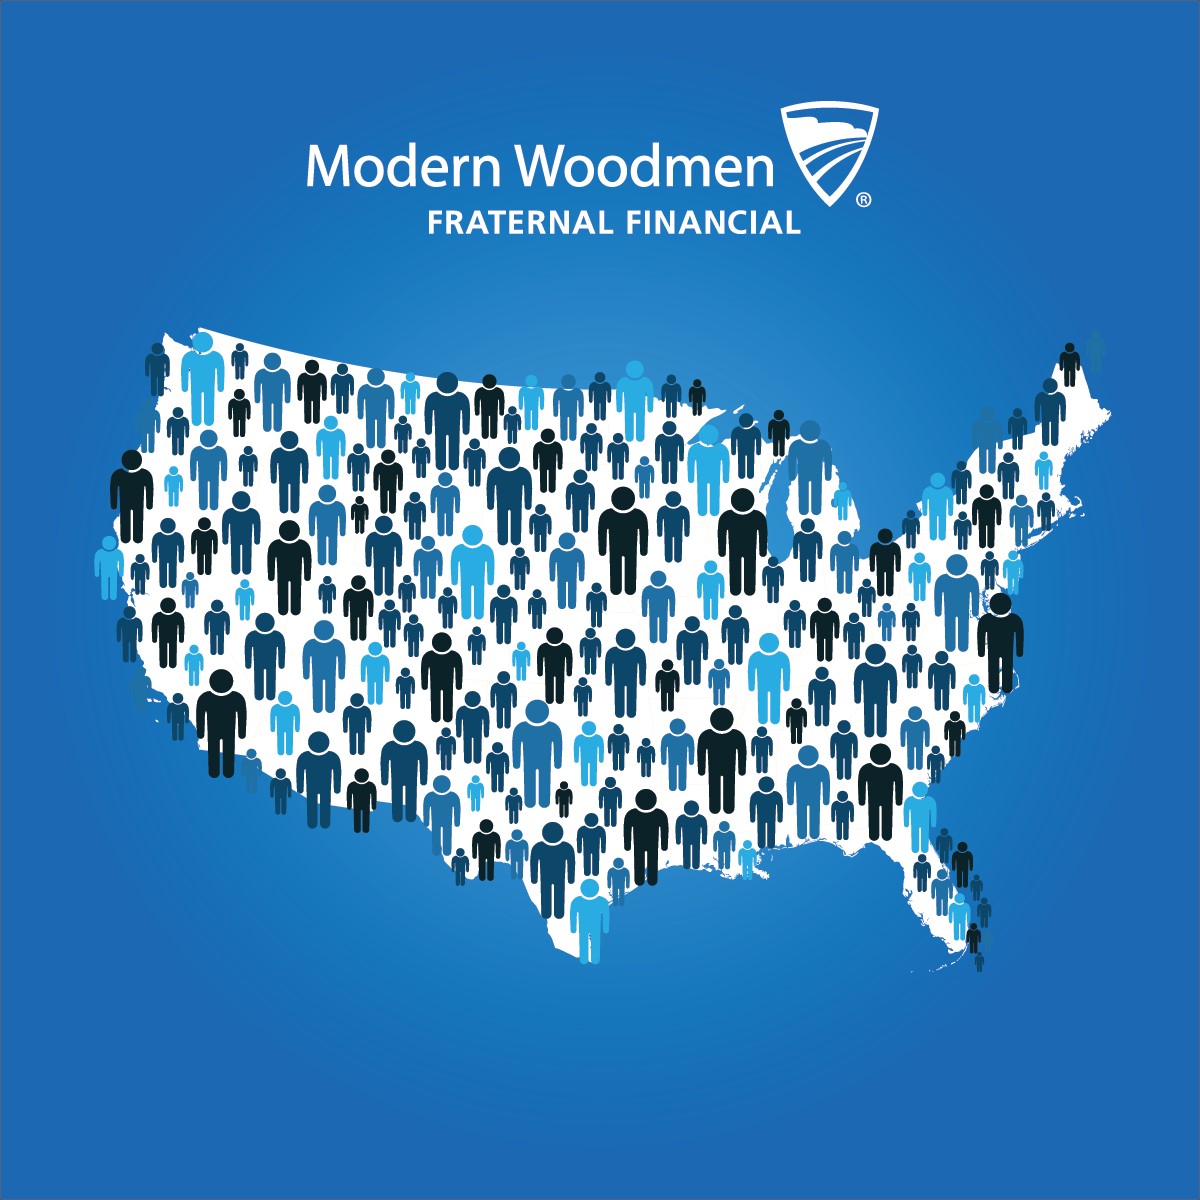 As a fraternal financial services organization, we support social, educational, volunteer and fundraising activities in members’ communities across the U.S. Use the map to see the impact made in your community! bit.ly/3TNN1DK